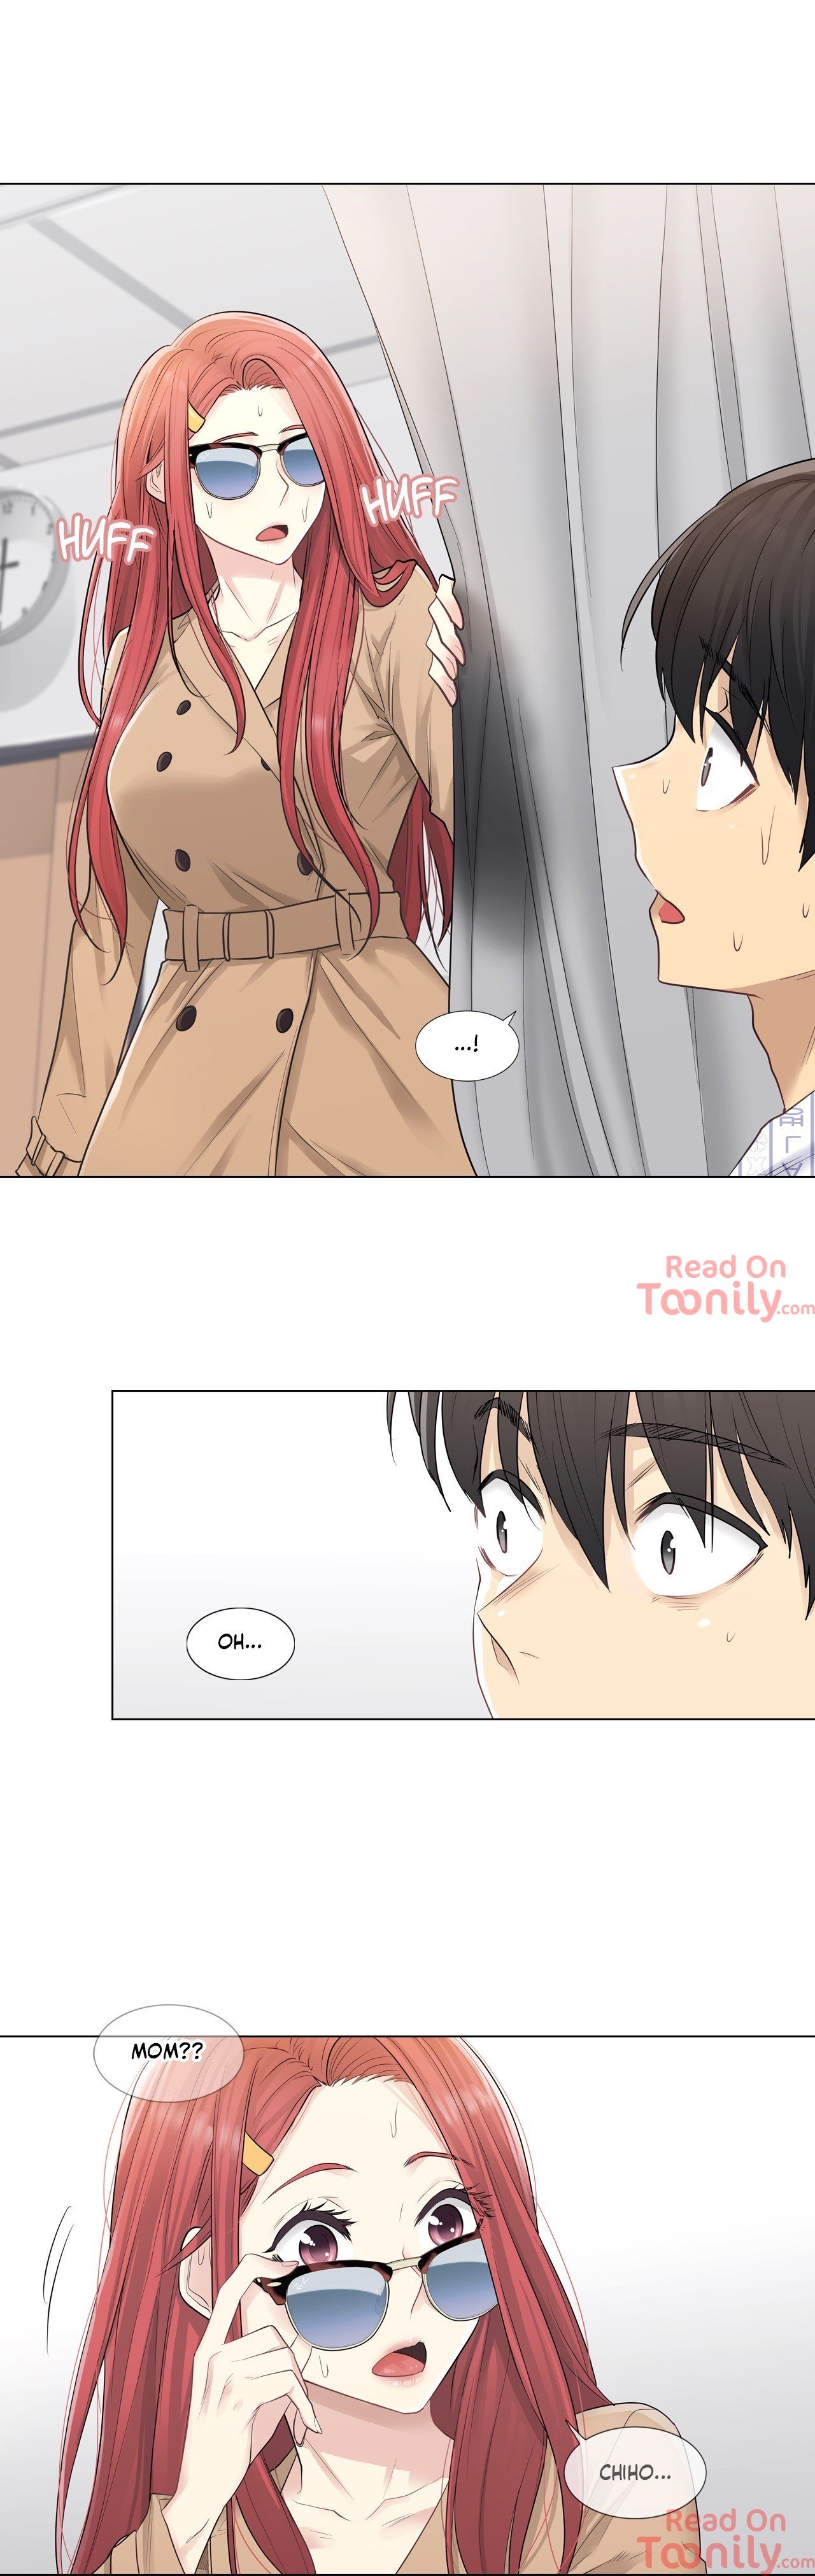 touch-to-unlock-chap-4-15